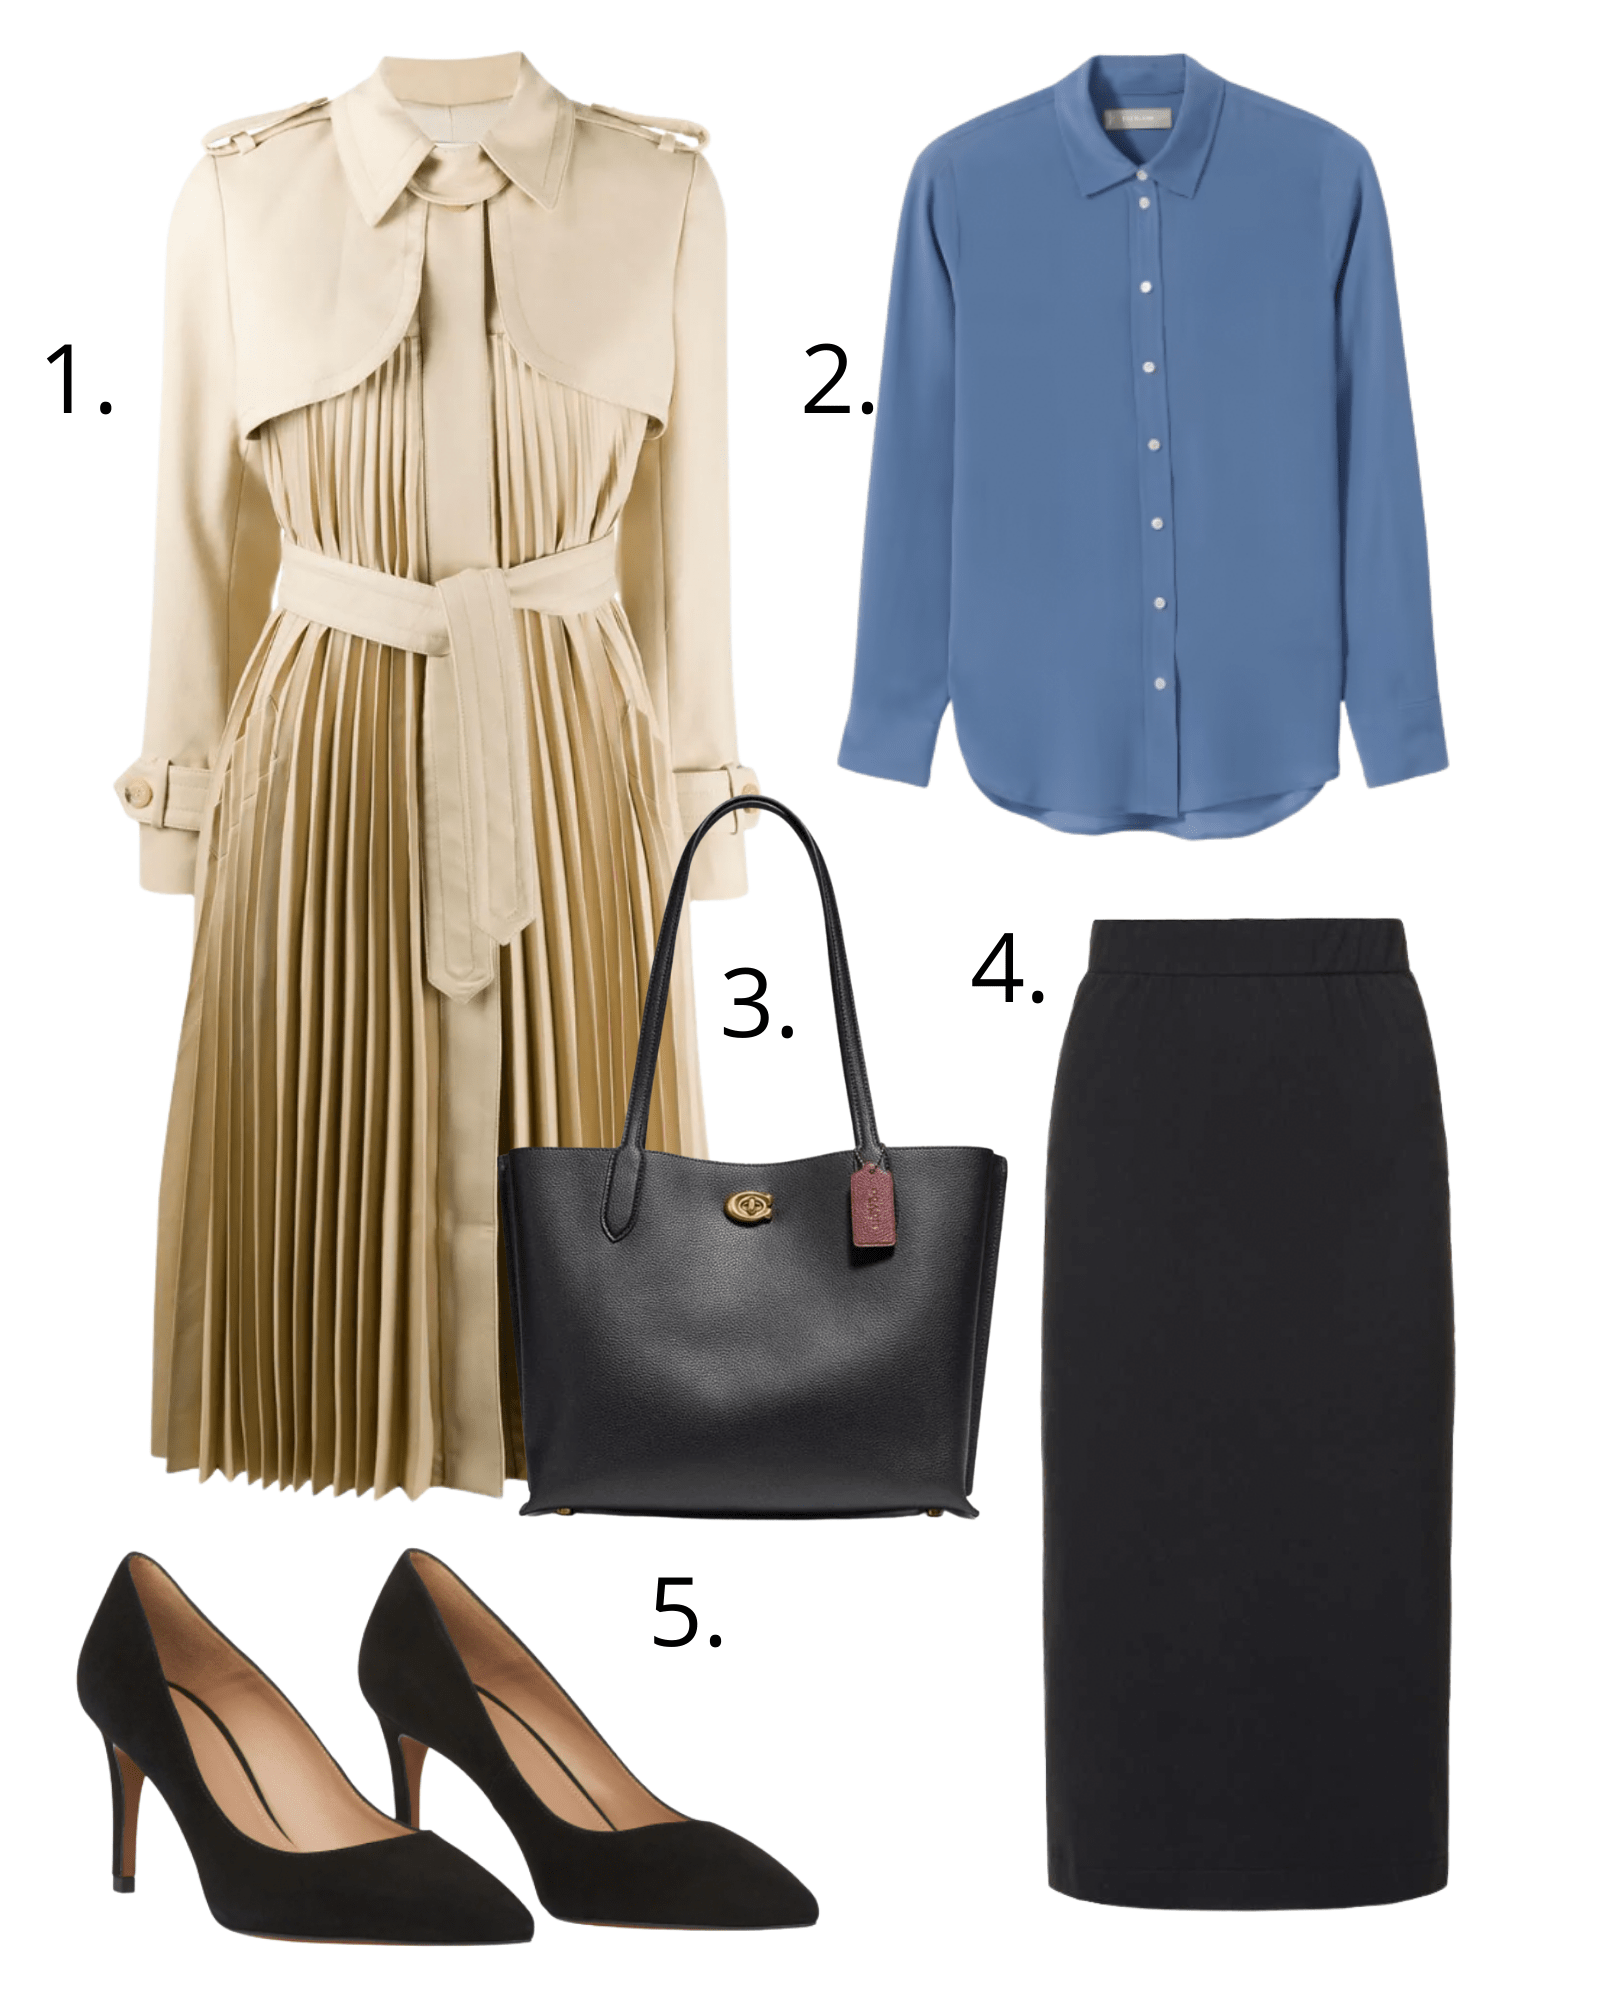 outfits-inspired-by-the-split